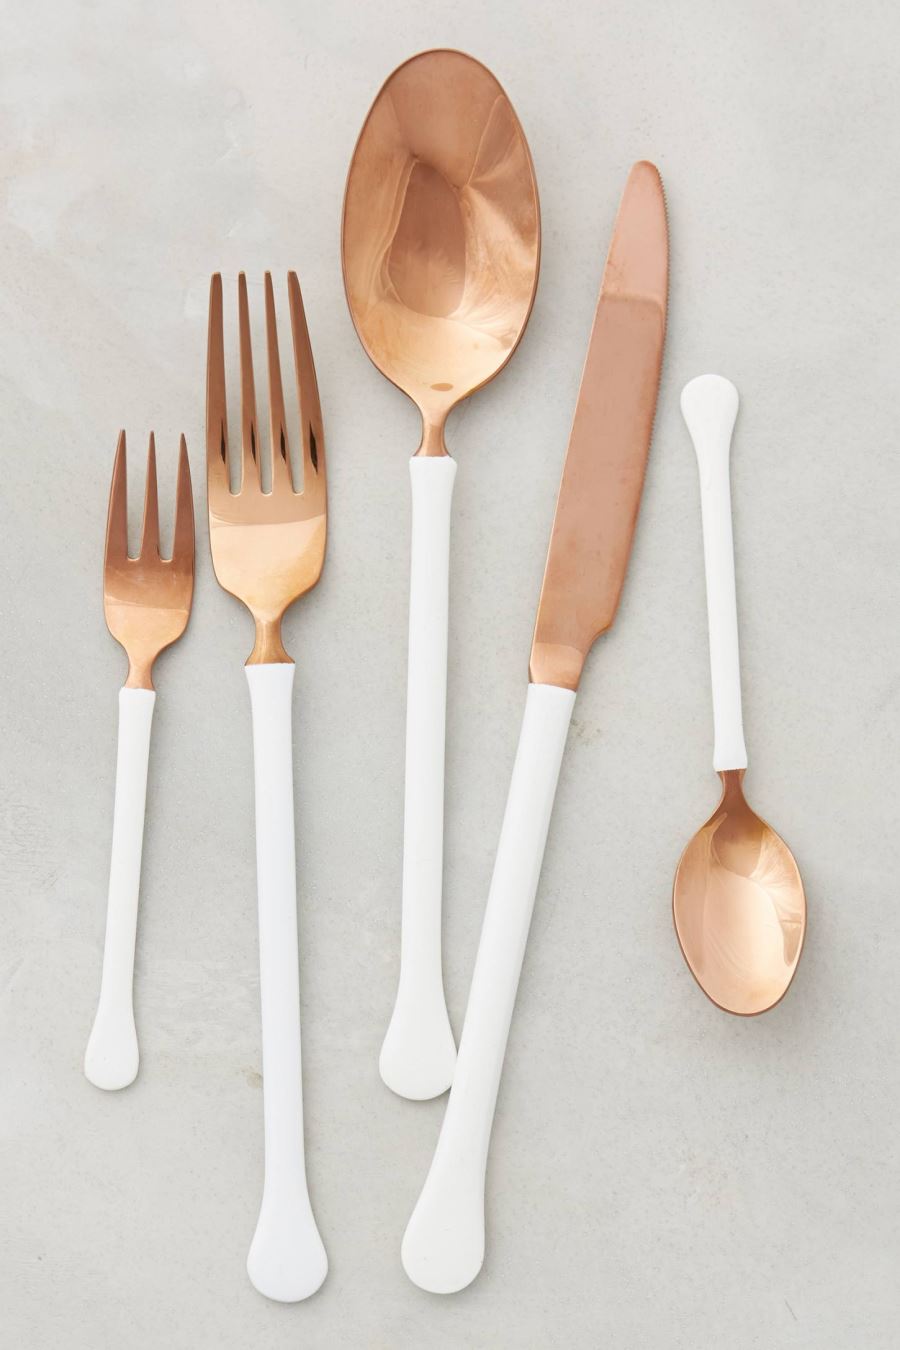 Copper and painted flatware from Anthropologie